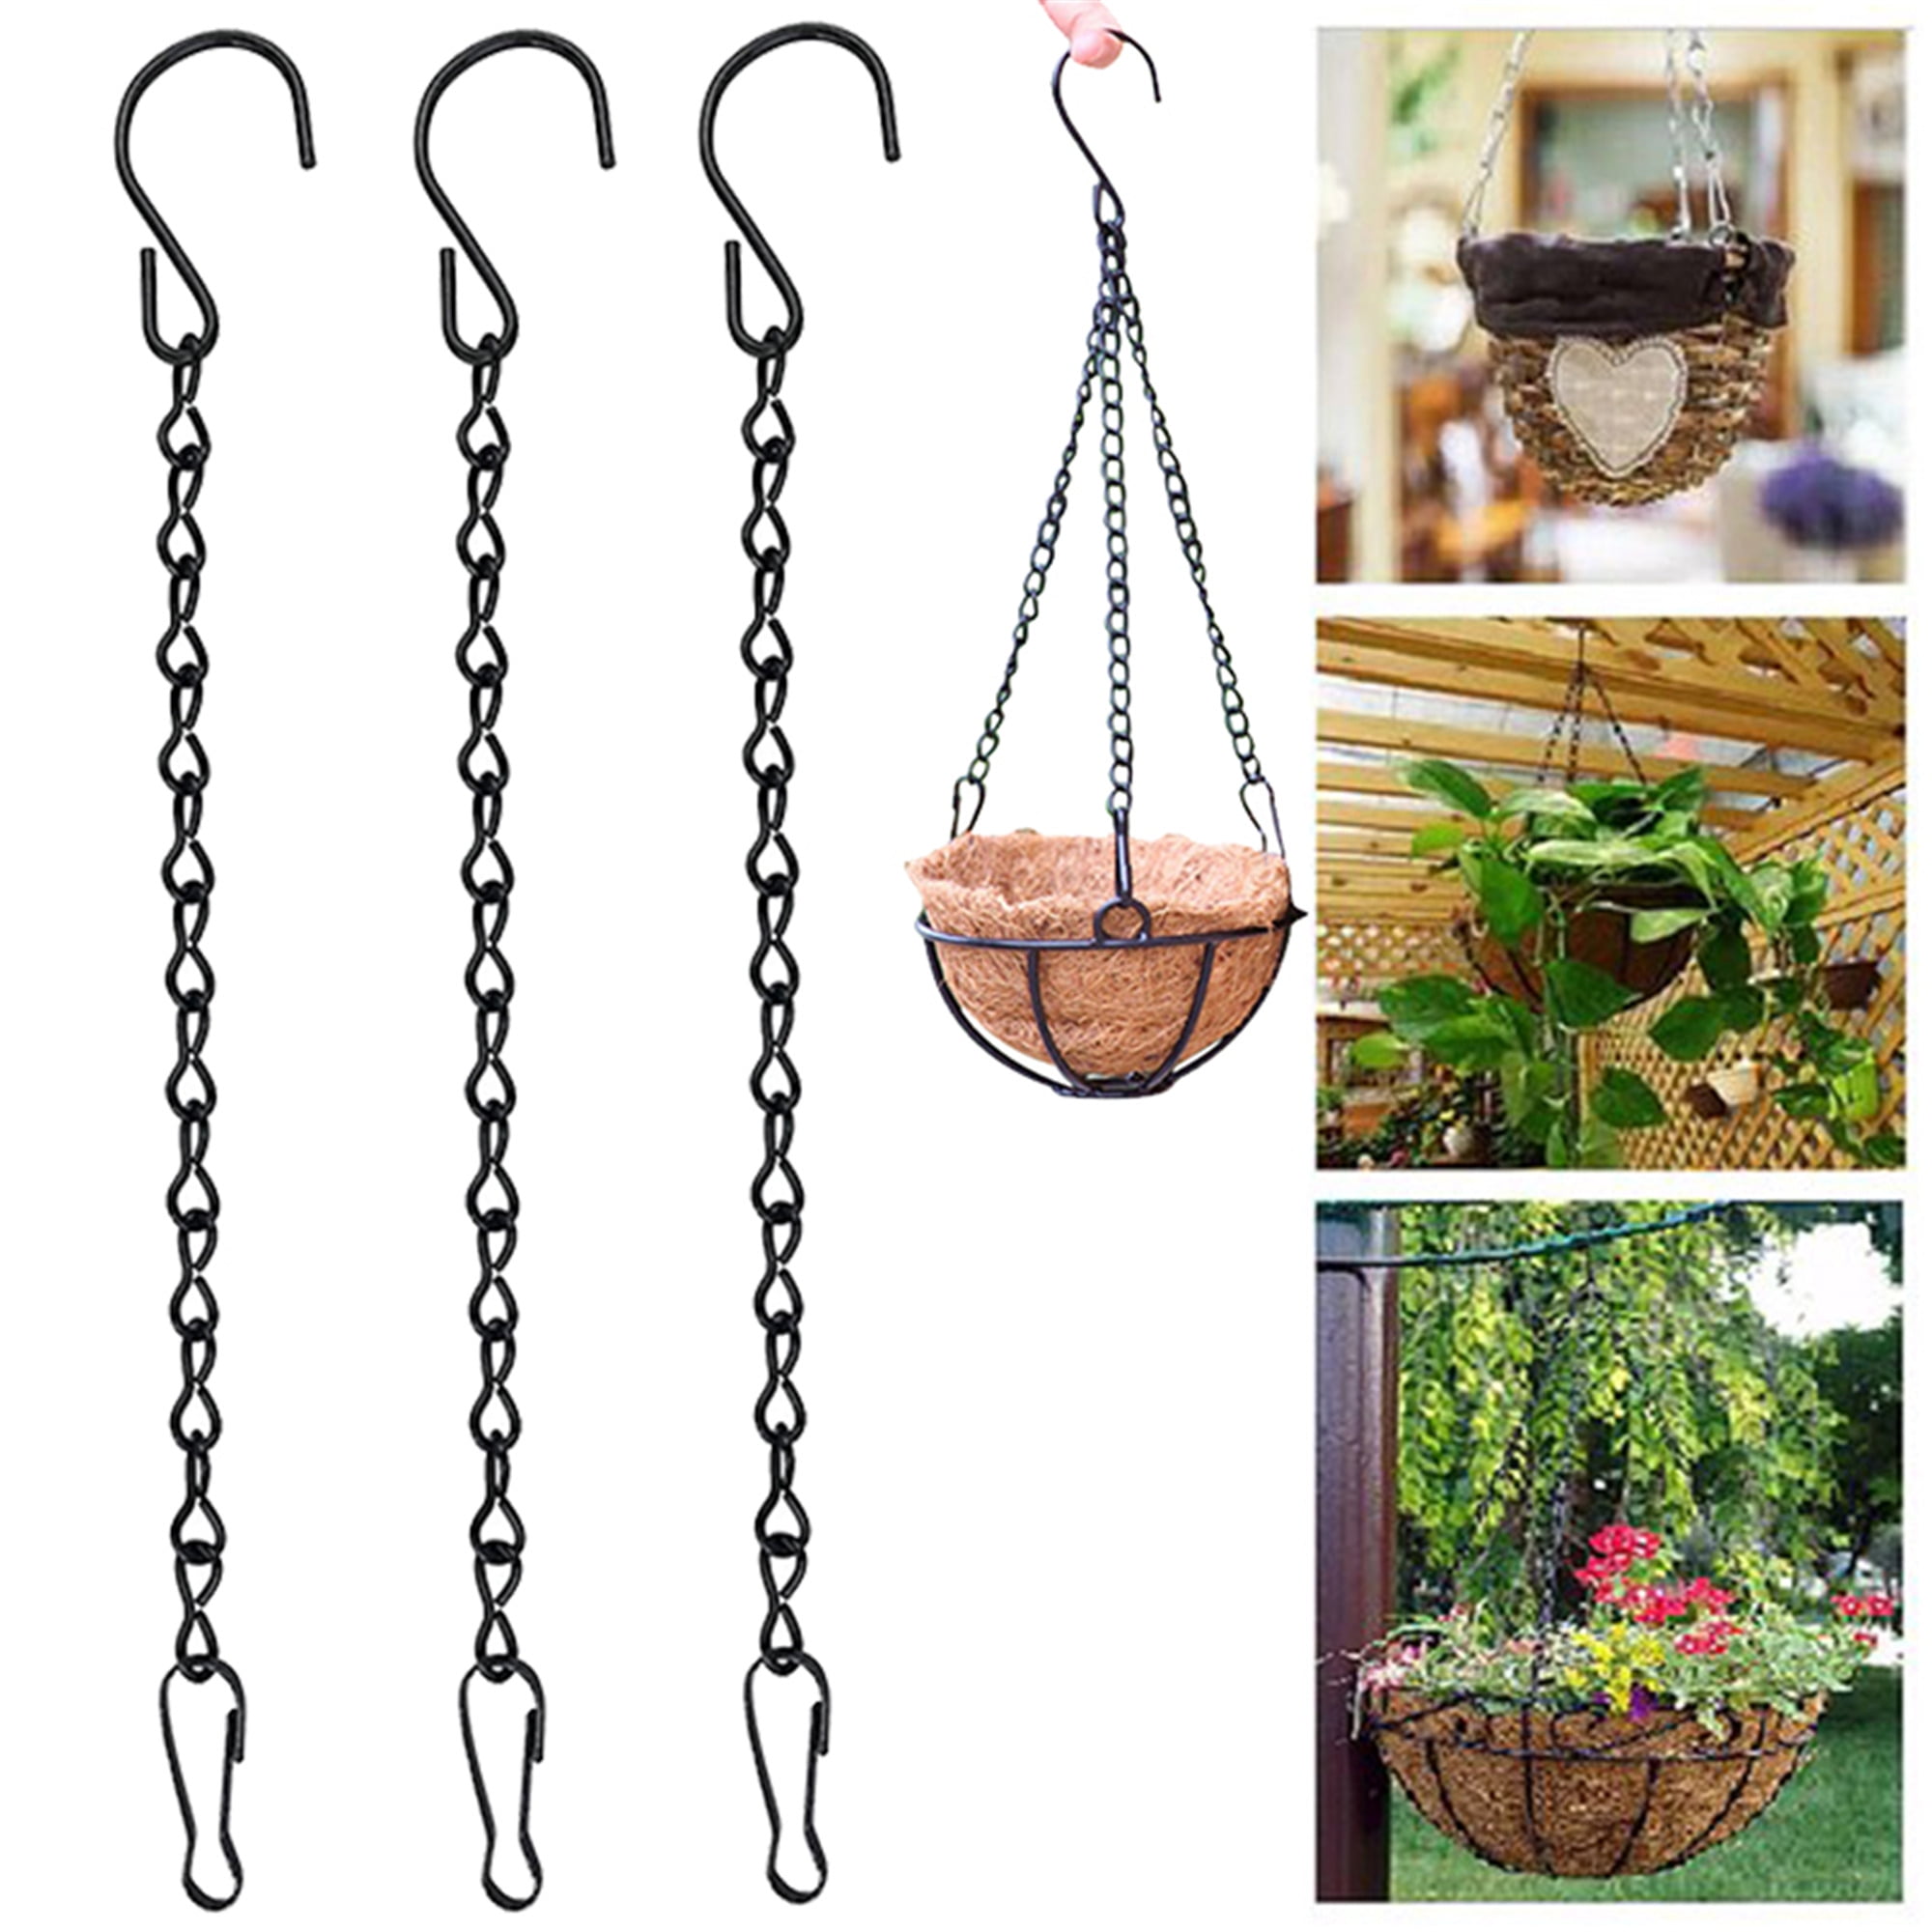 Hanging Chain For Bird Feeders, Planters, Fixtures, Lanterns, Suet Baskets,  Wind Chimes and More! Outdoor / Indoor Use… – 1337nih